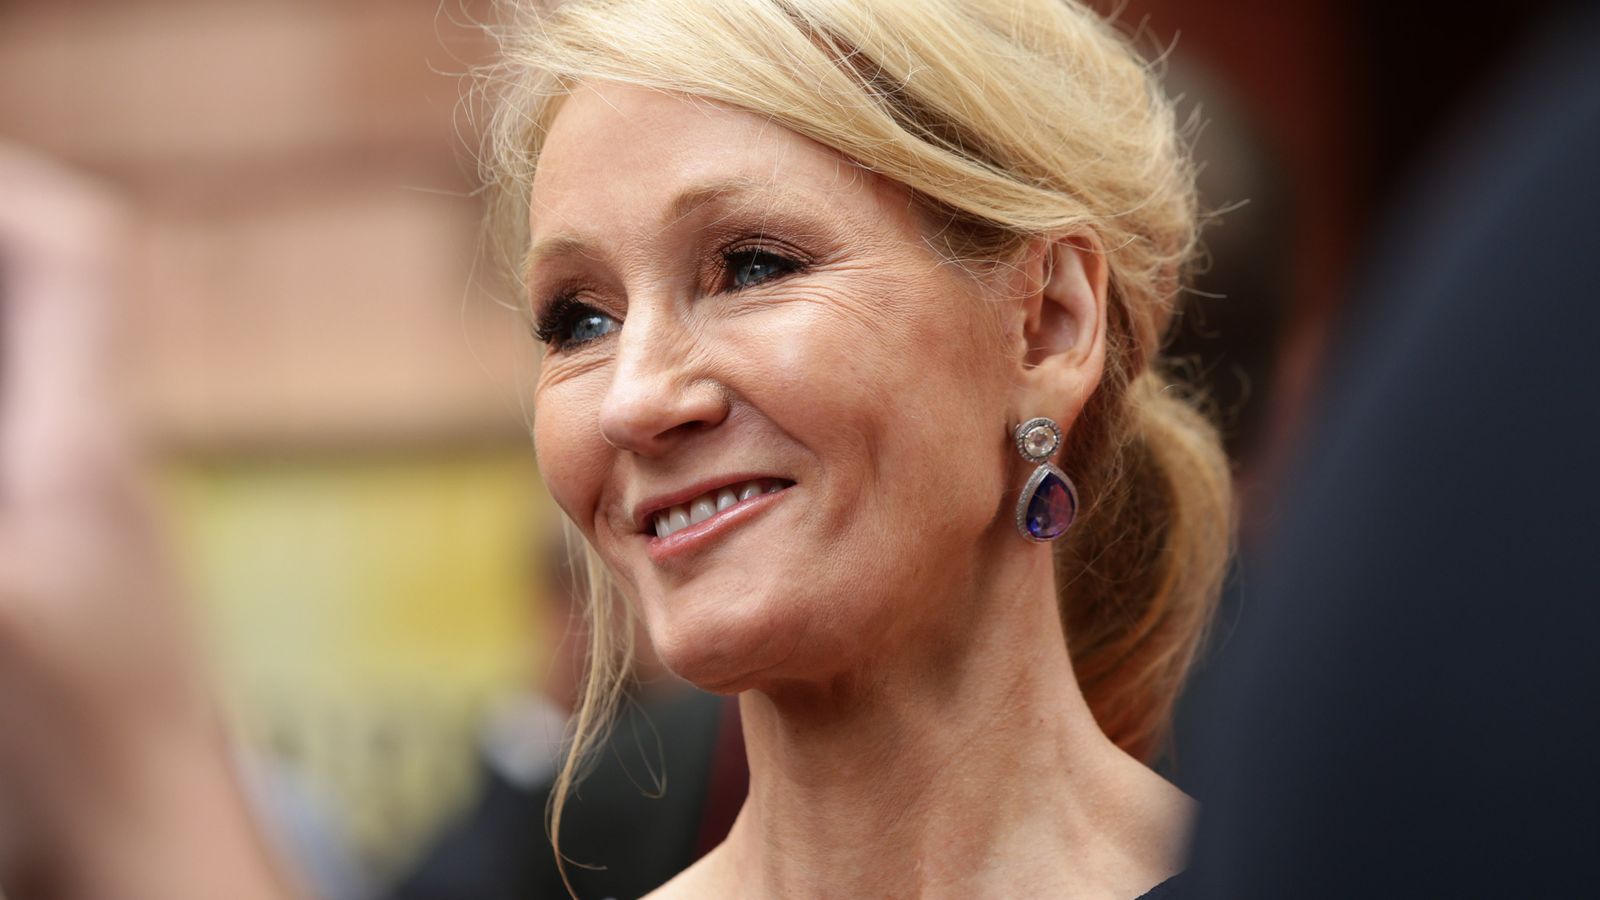 JK Rowling working with police over death threat after voicing support for Salman Rushdie